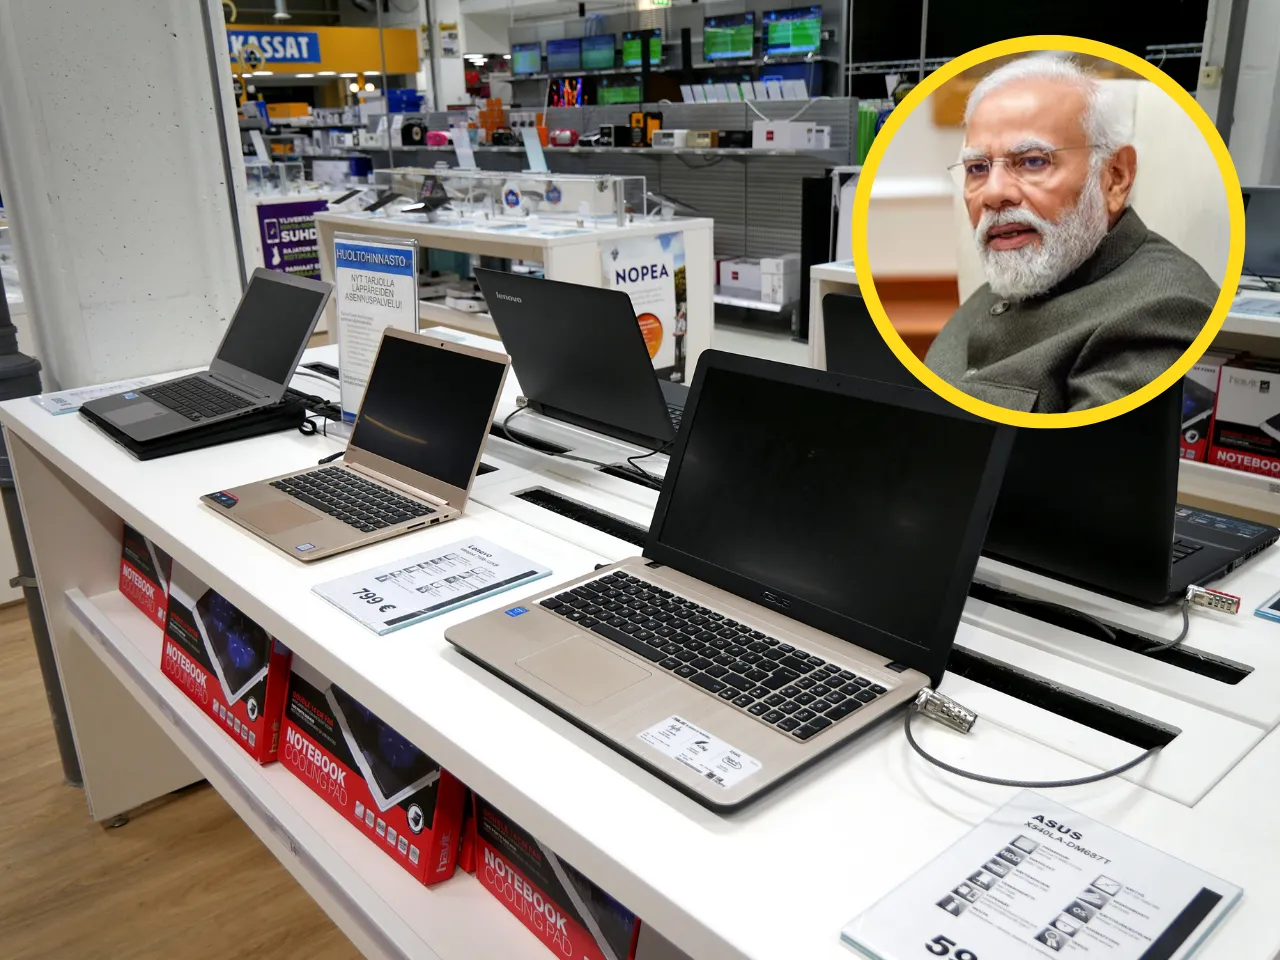 Indian govt to review import management system for laptops in September: Report